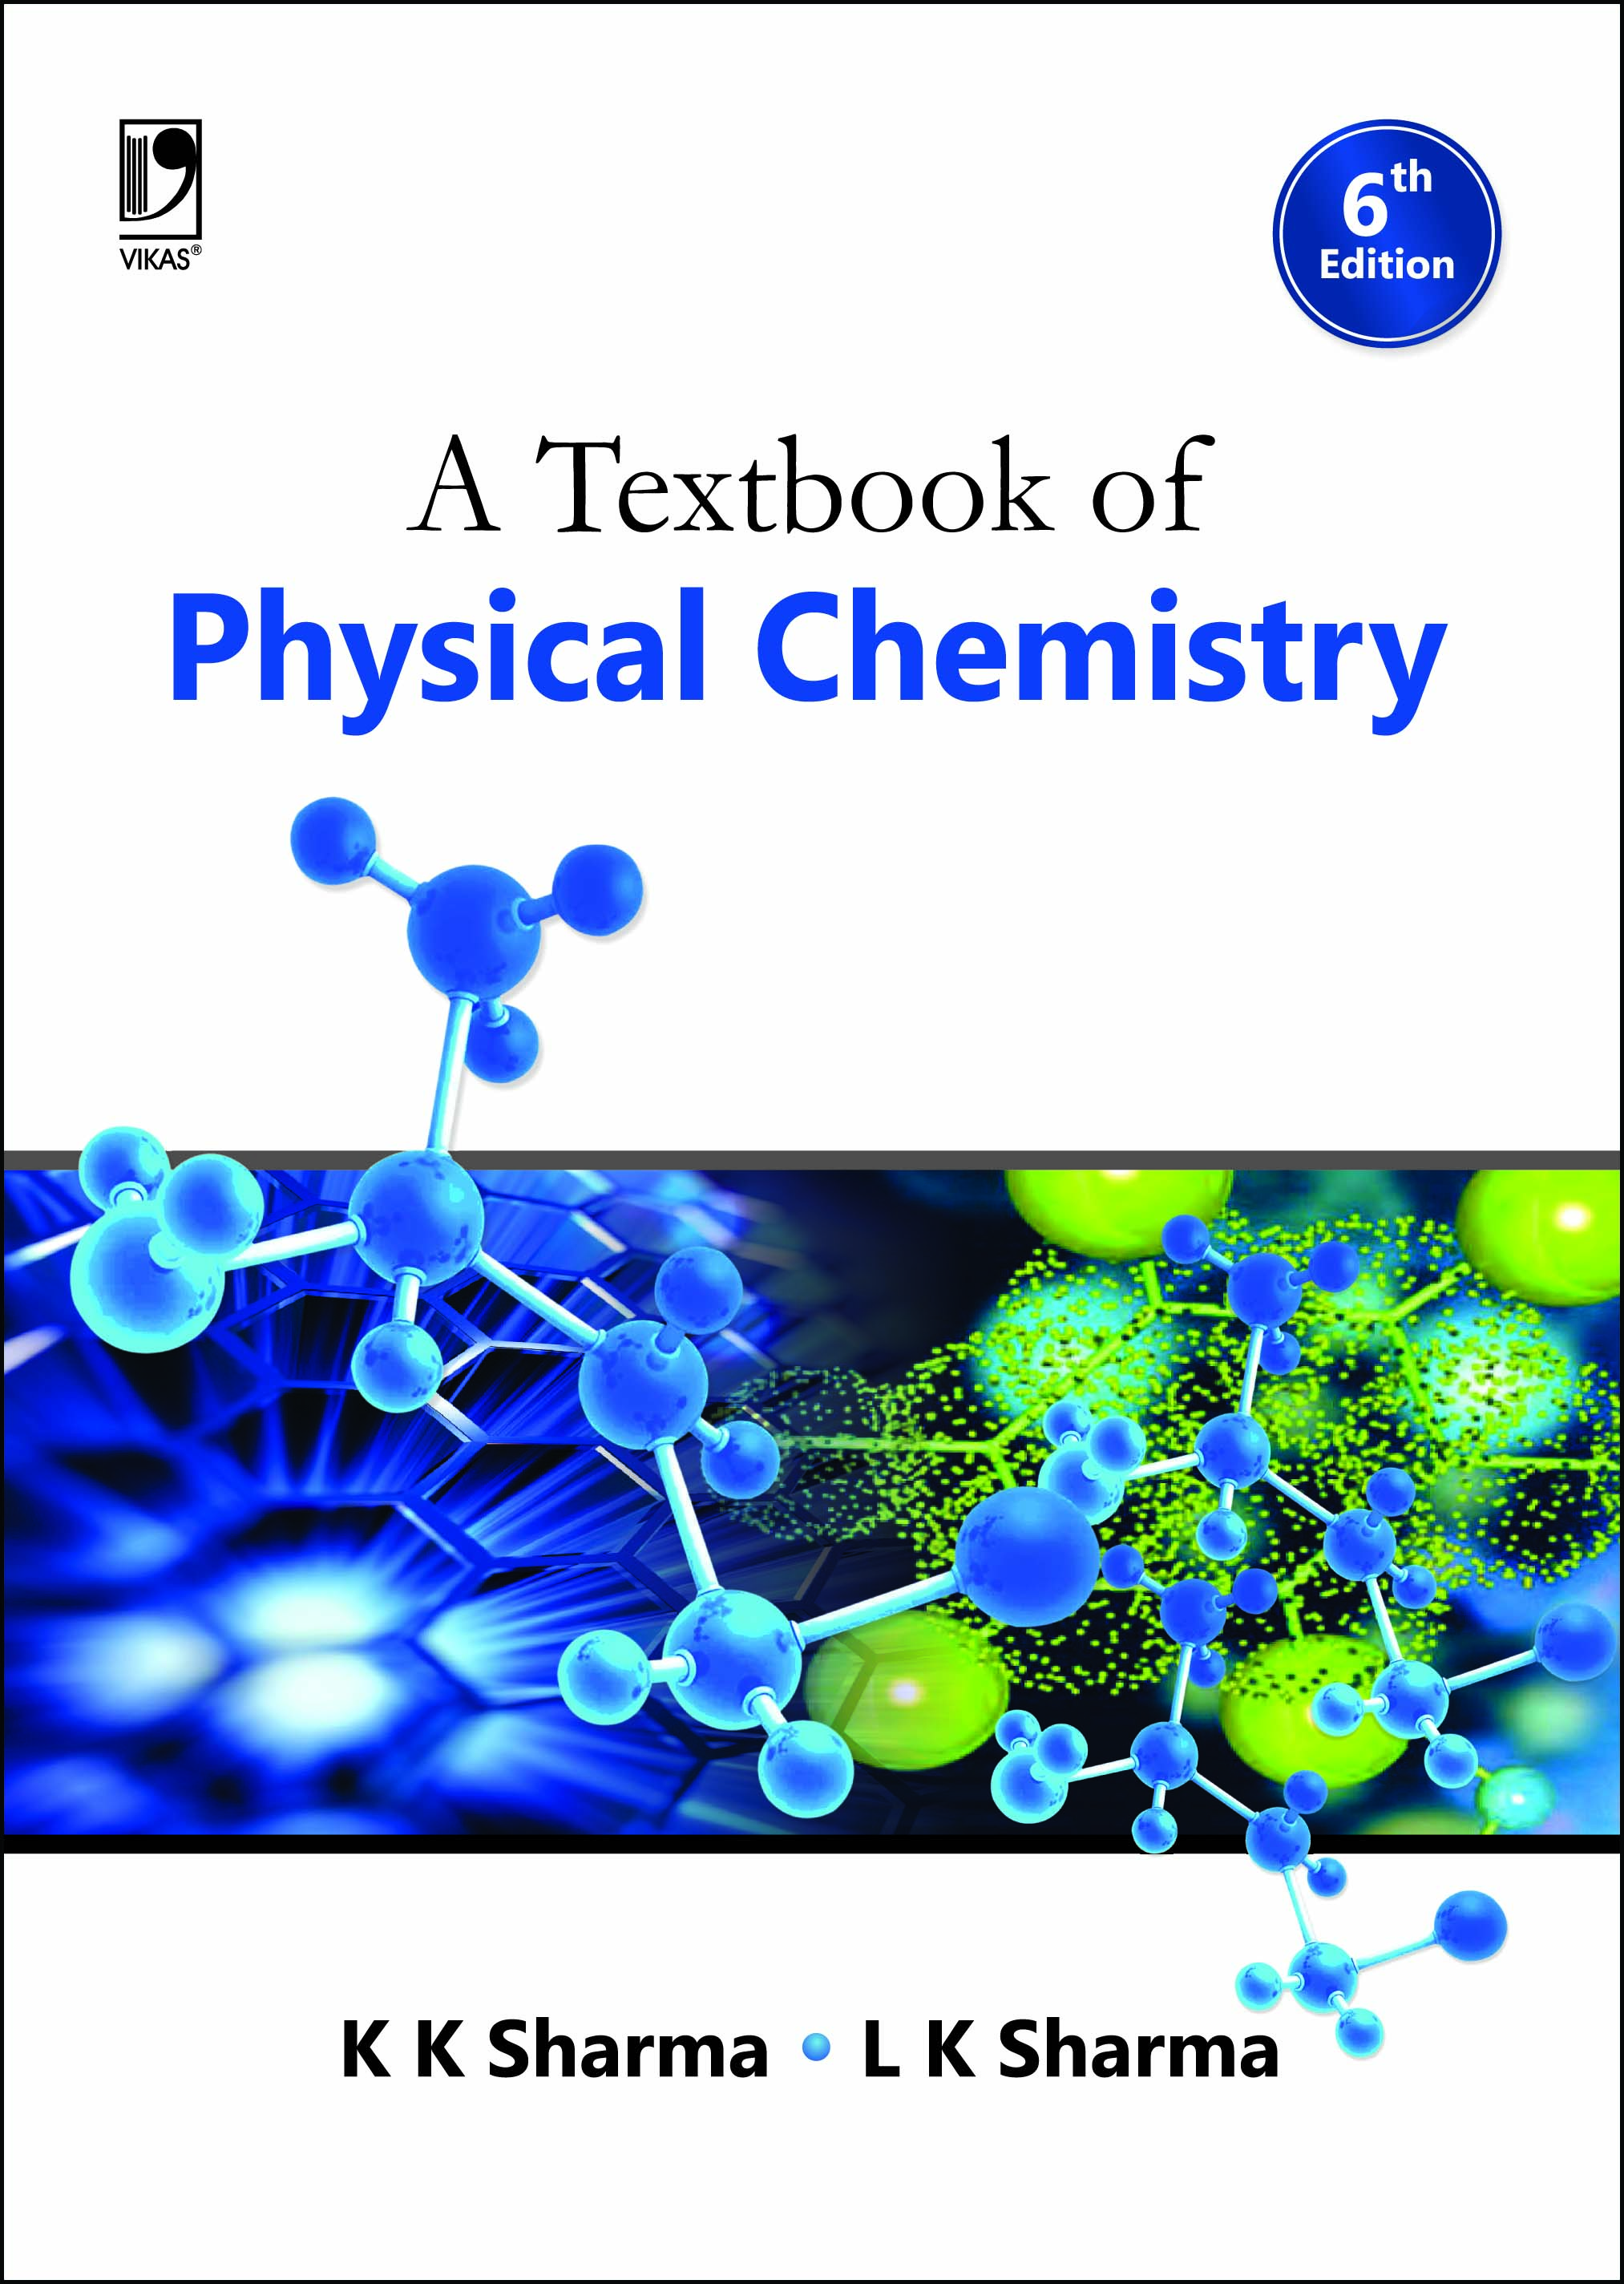 physical chemistry thesis topics